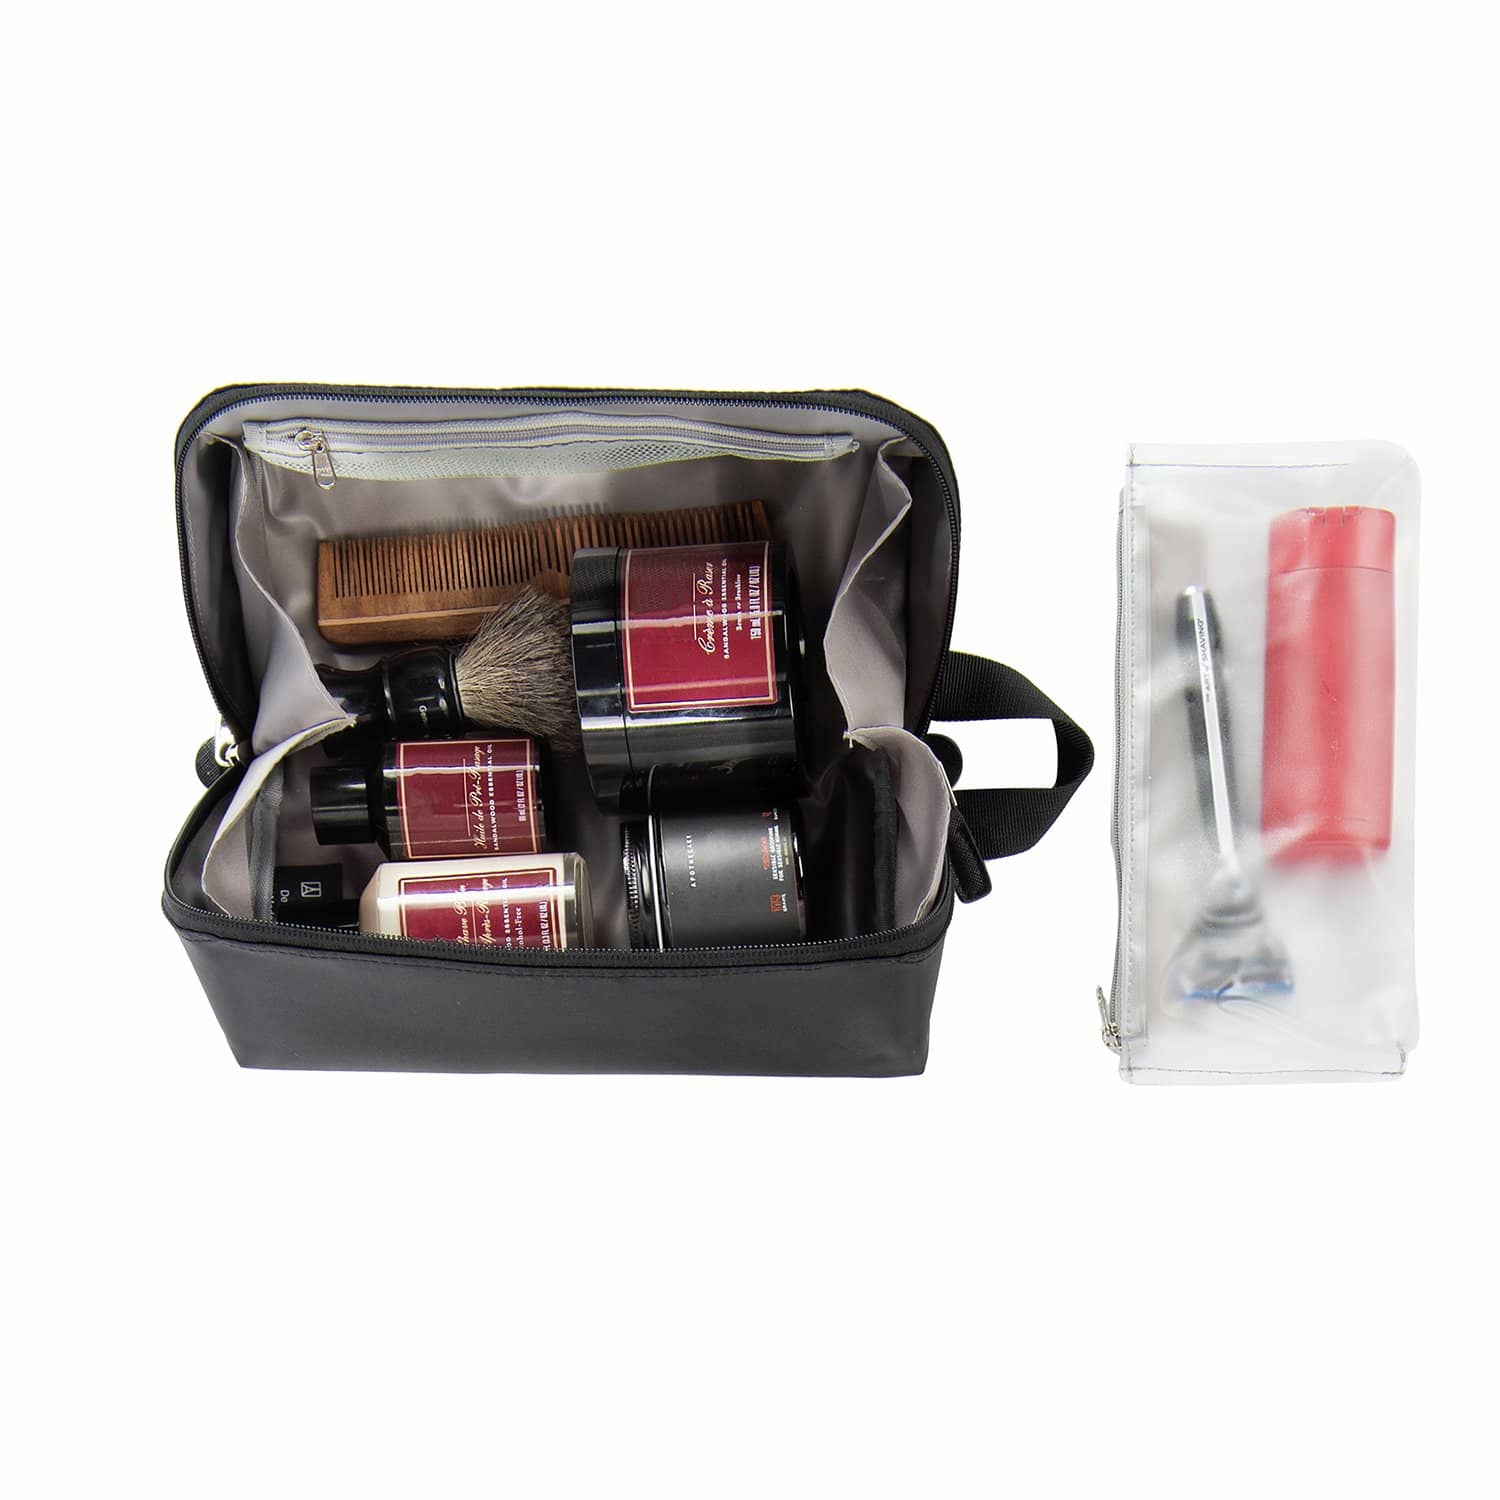 Travelpro Essentials Maxaccess Cubes Toiletry Organizer